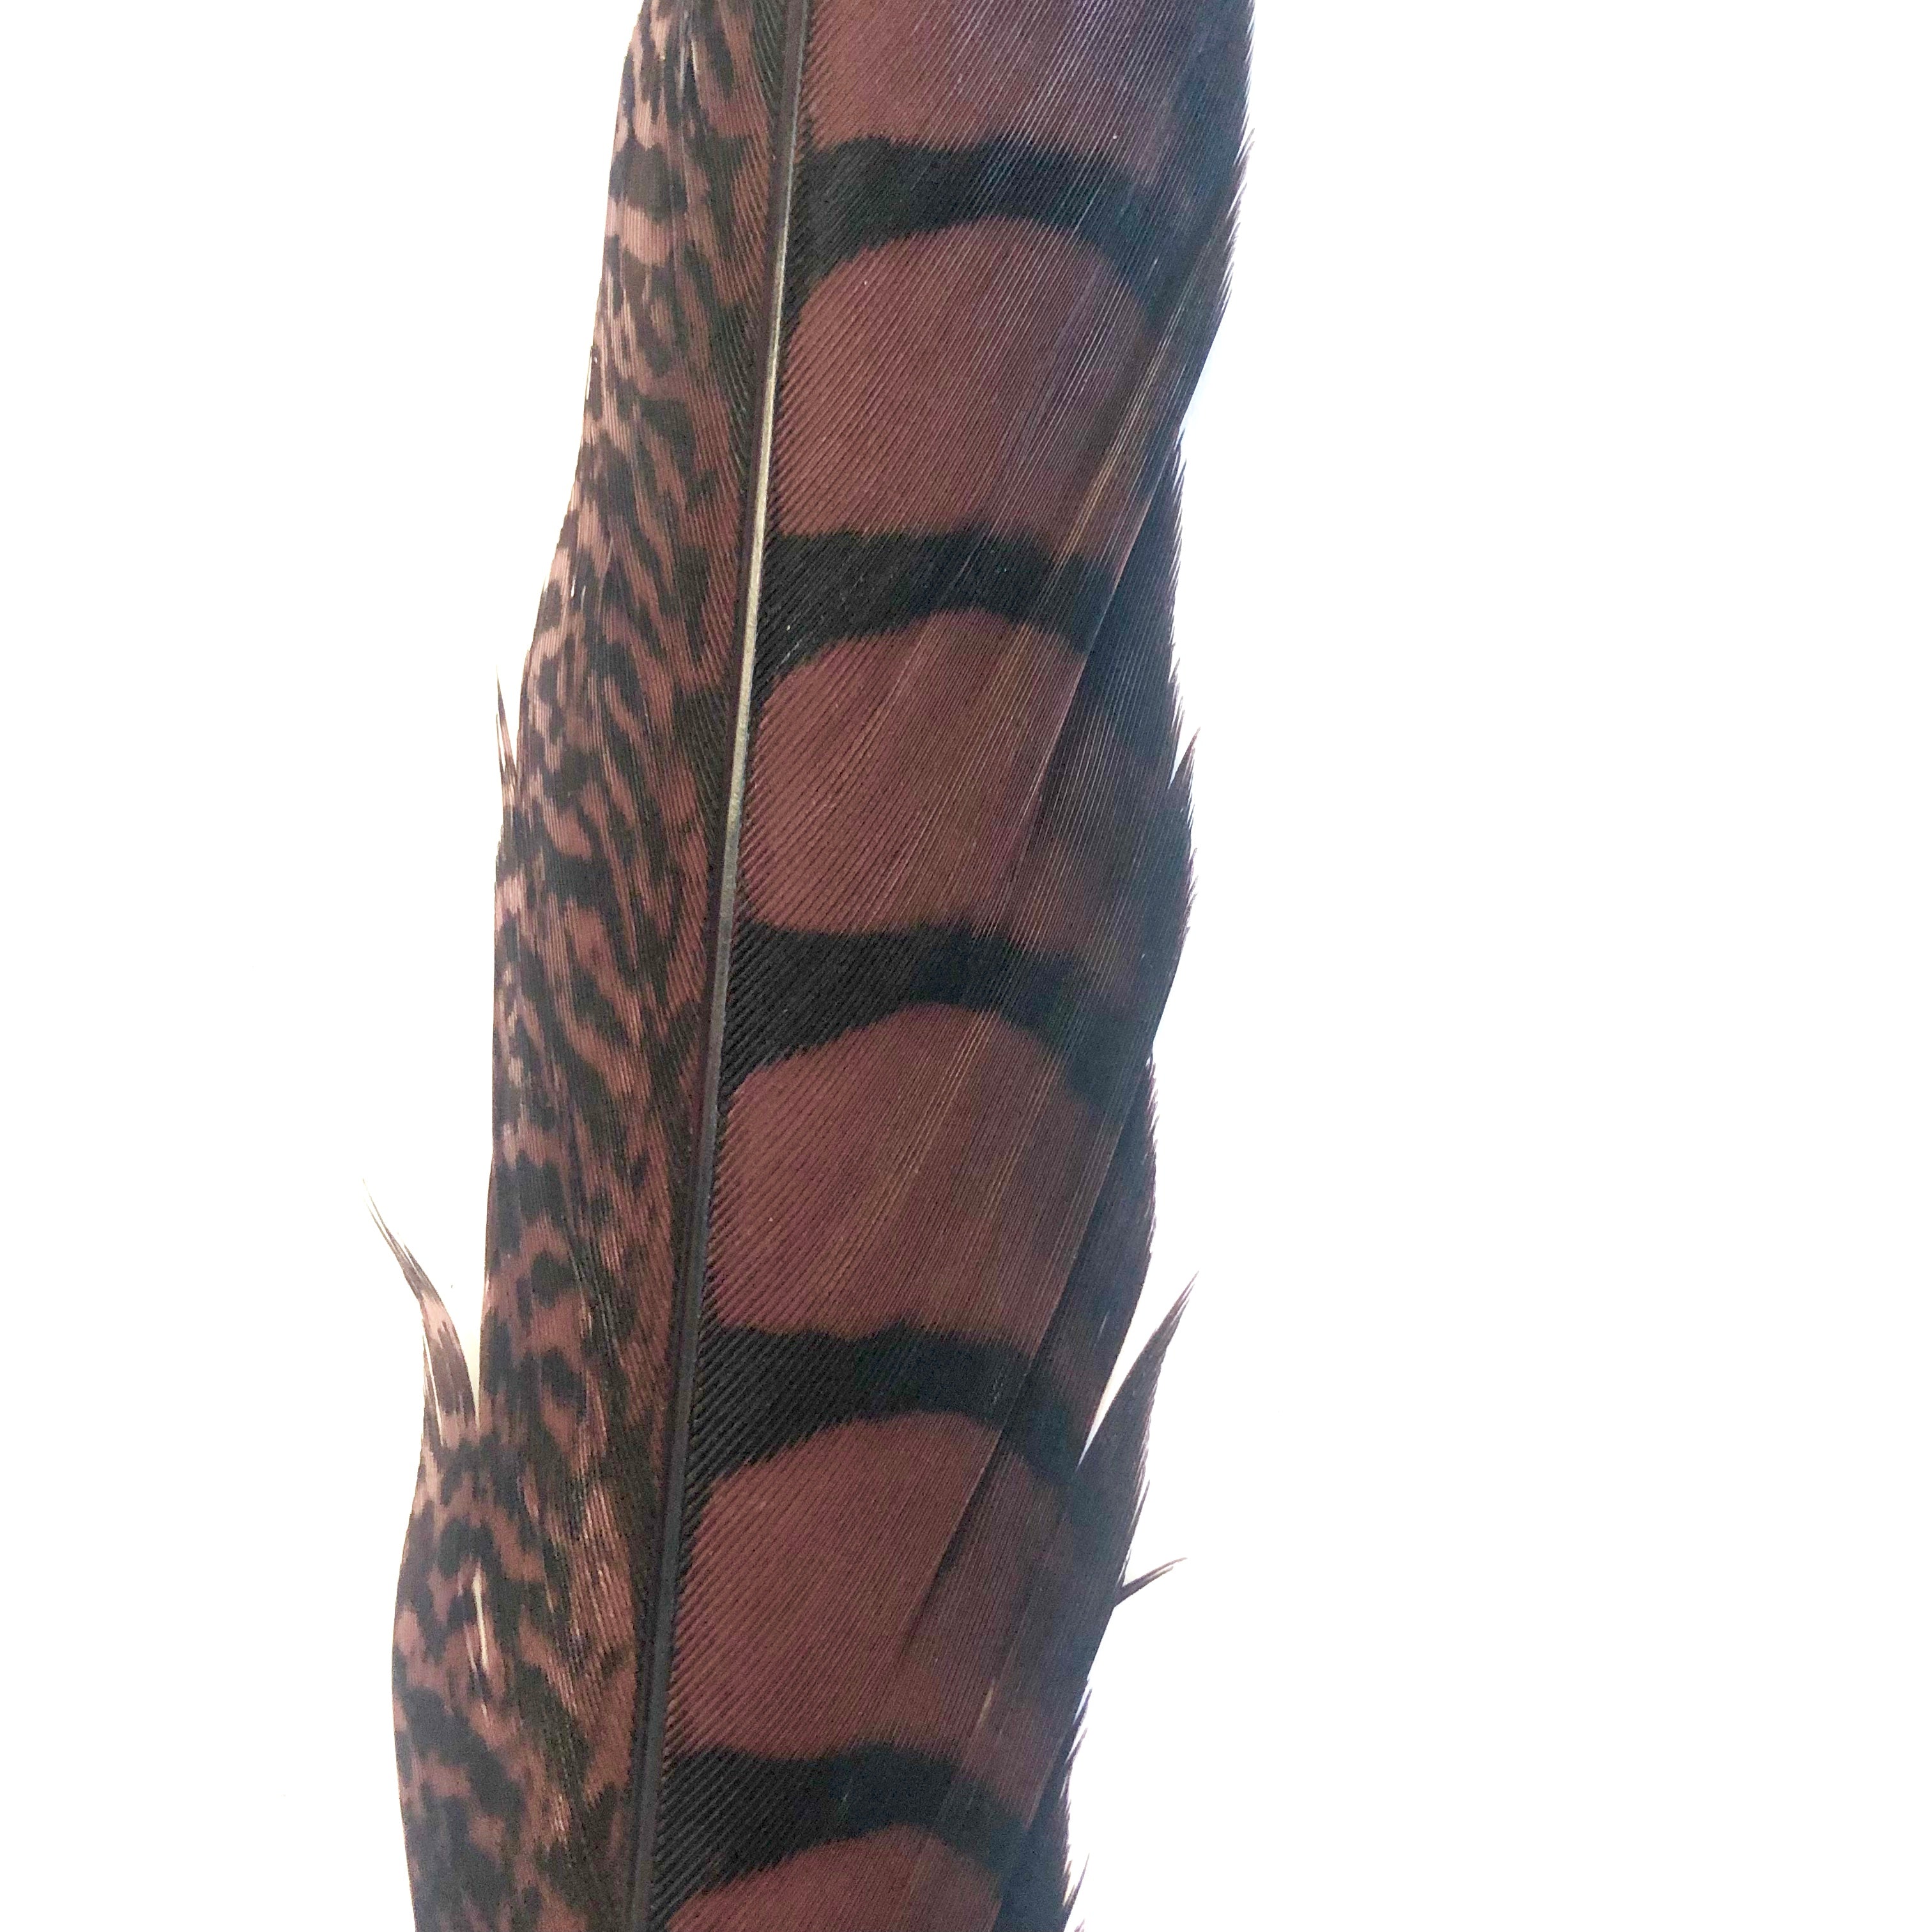 30" to 38" Lady Amherst Pheasant Side Tail Feather - Chocolate Brown